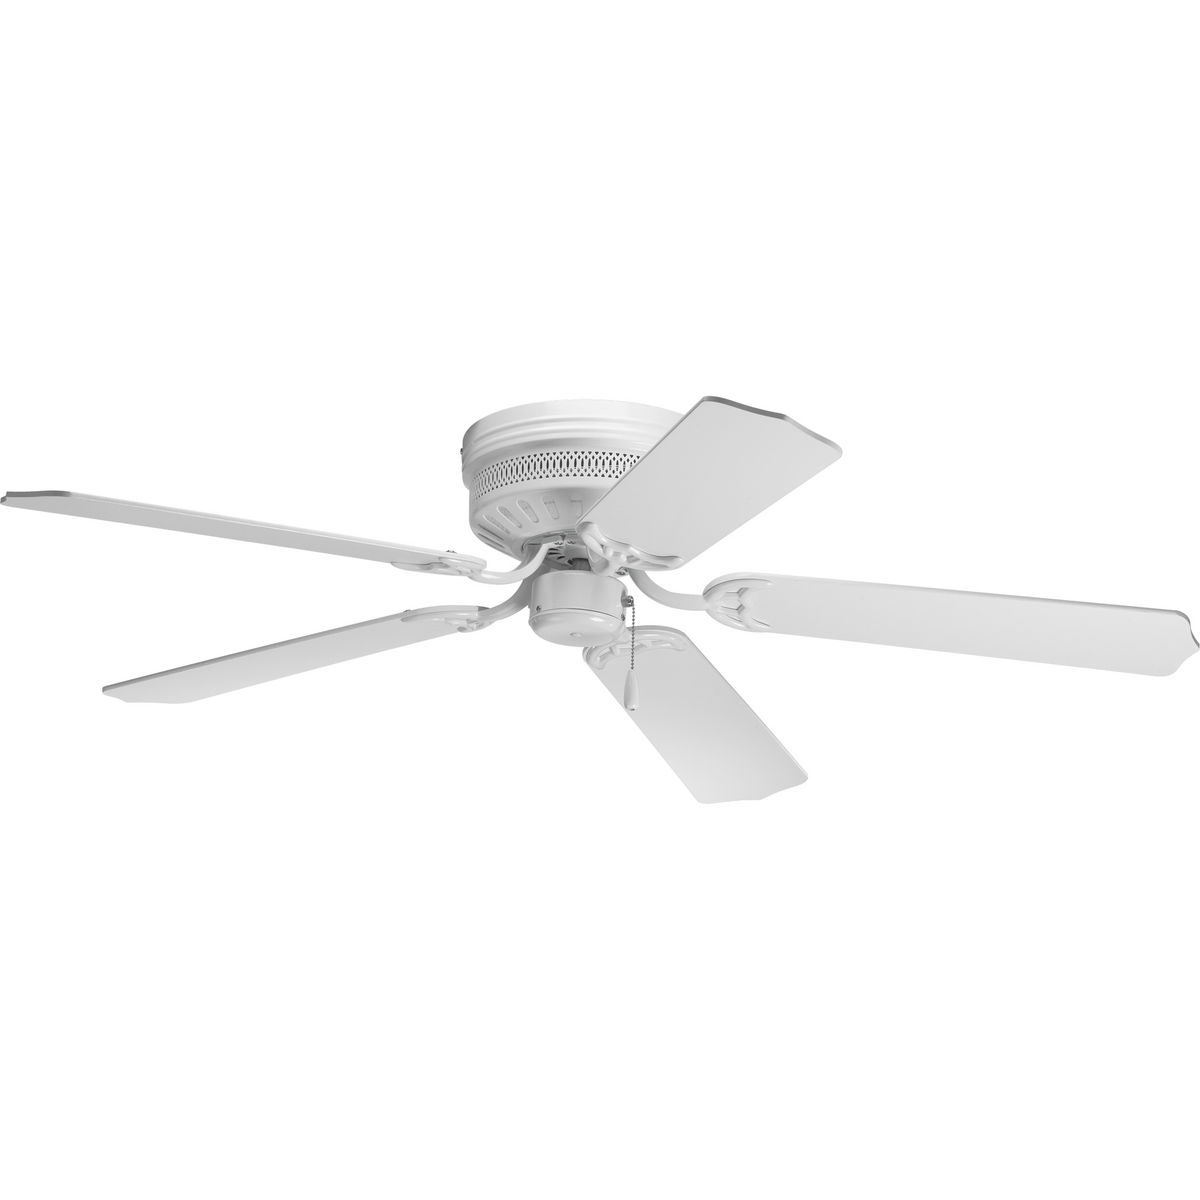 52 in indoor hugger fan includes 5 White blades, White finish, and 11 degree pitch. Hugger style housing permits fan installation on lower ceilings. Powerful AirPro motor features 3-speed control that can also be reversed to provide year-round comfort. Includes 15-year warranty fan and compatible is with universal light kits. Select from one of our stylish lighting options to fully coordinate your decor. Can be used to comply with California Title 20.